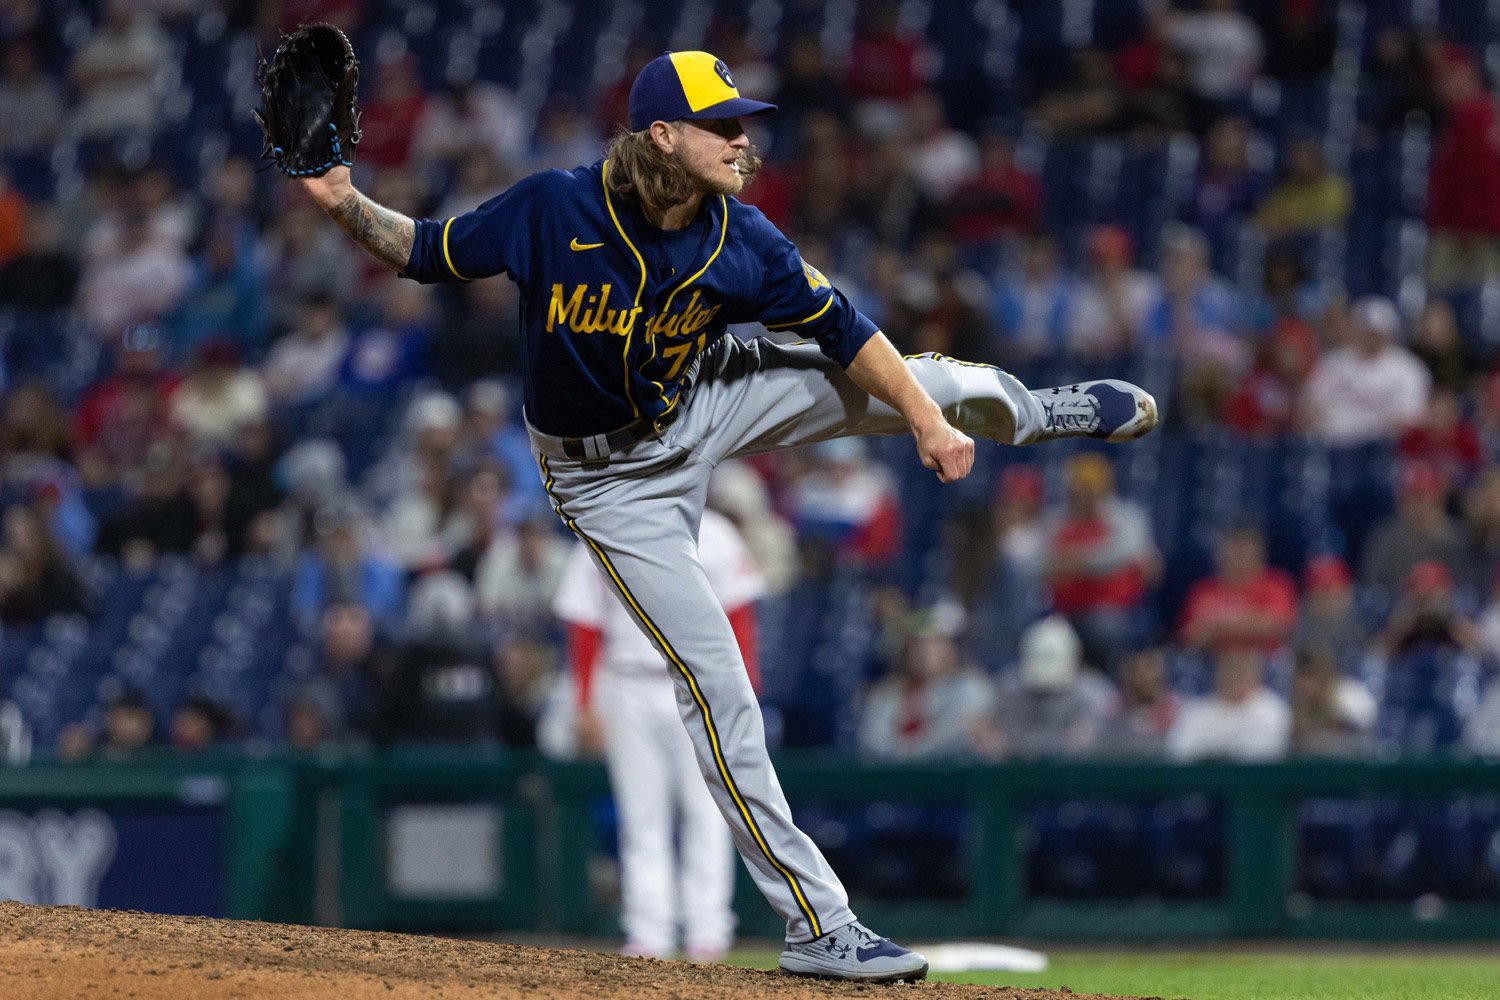 Brewers closer Josh Hader, MLB's best reliever, keeps getting better